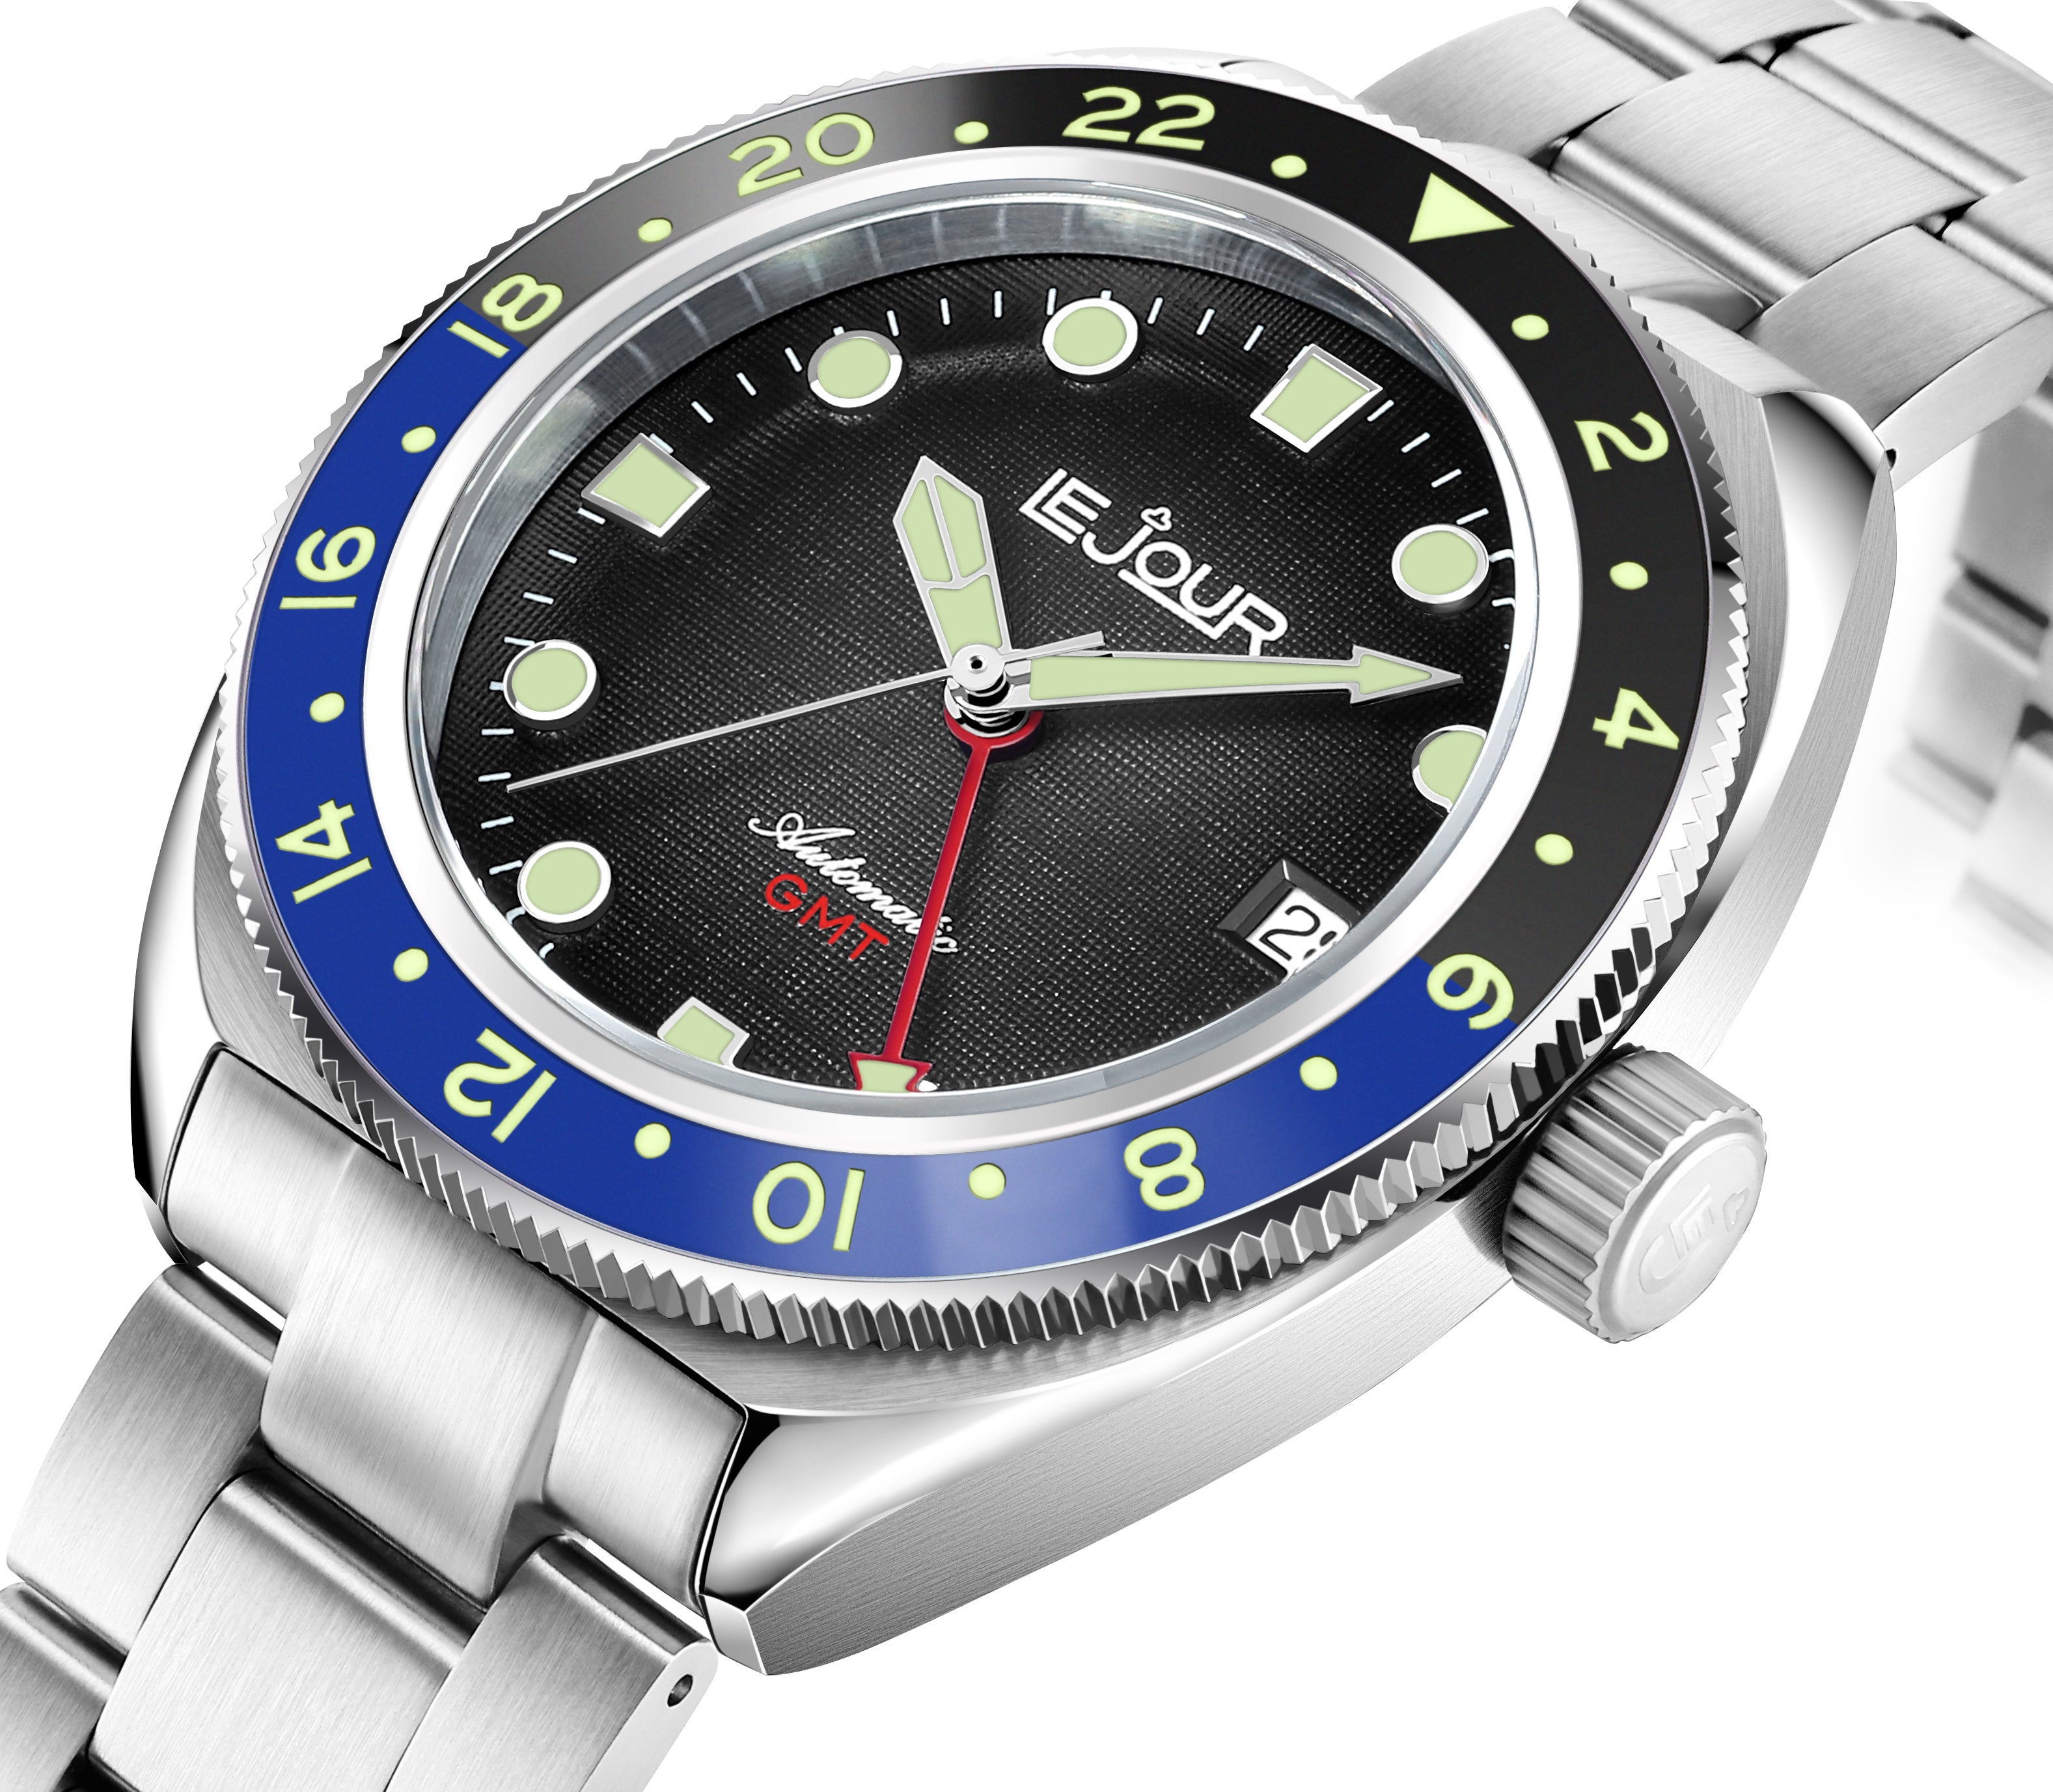 Le Jour - Hammerhead GMT Dive Watch I Swiss Made I Automatic - Le